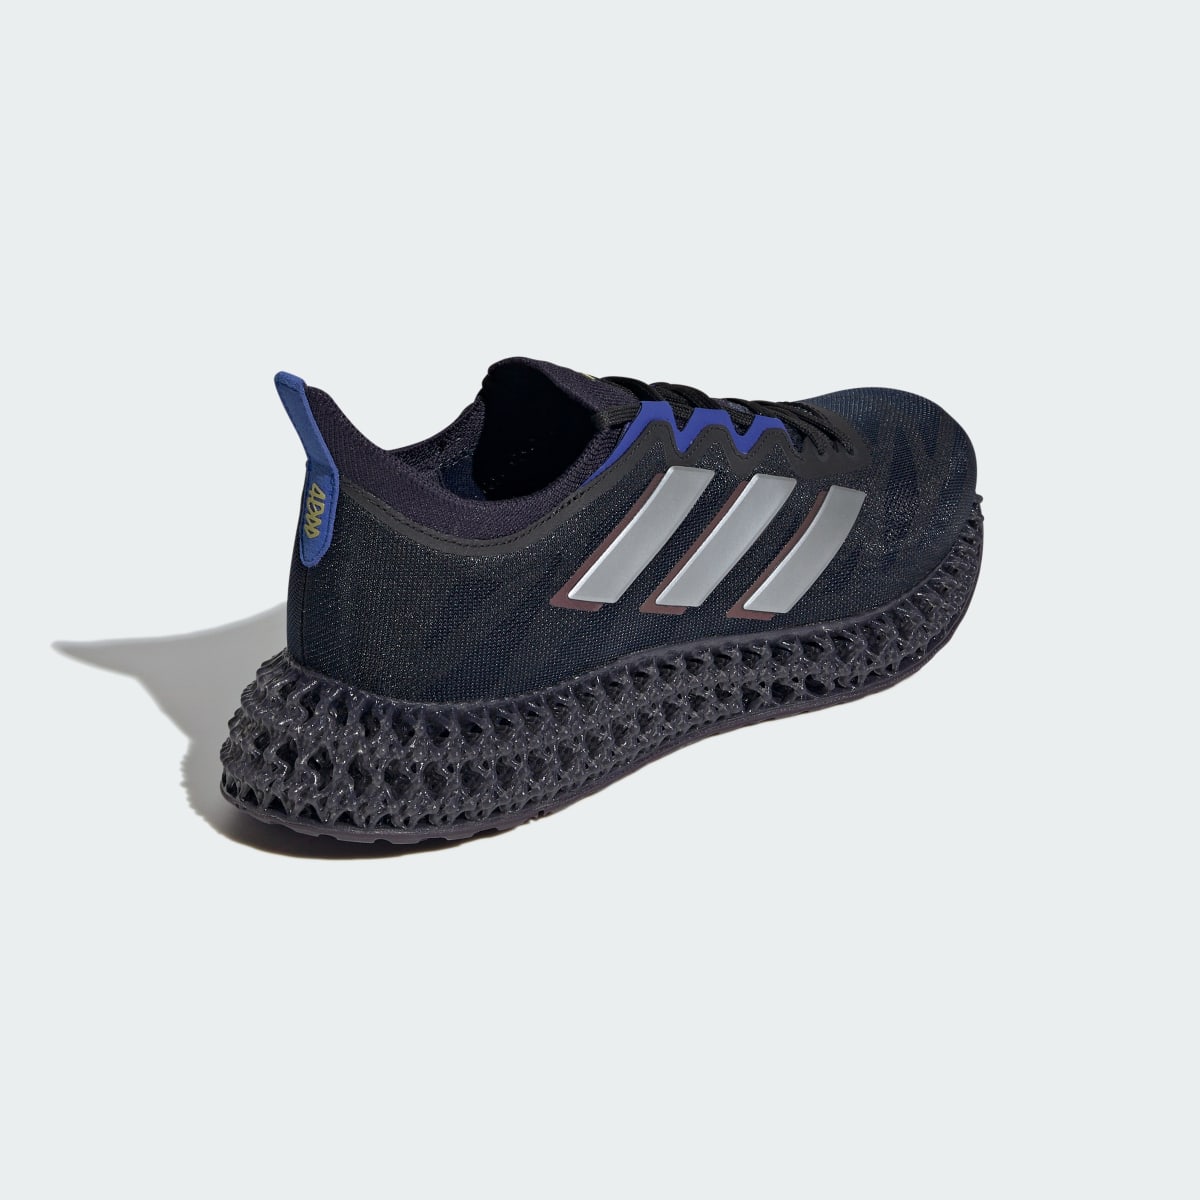 Adidas 4DFWD 3 Running Shoes. 6